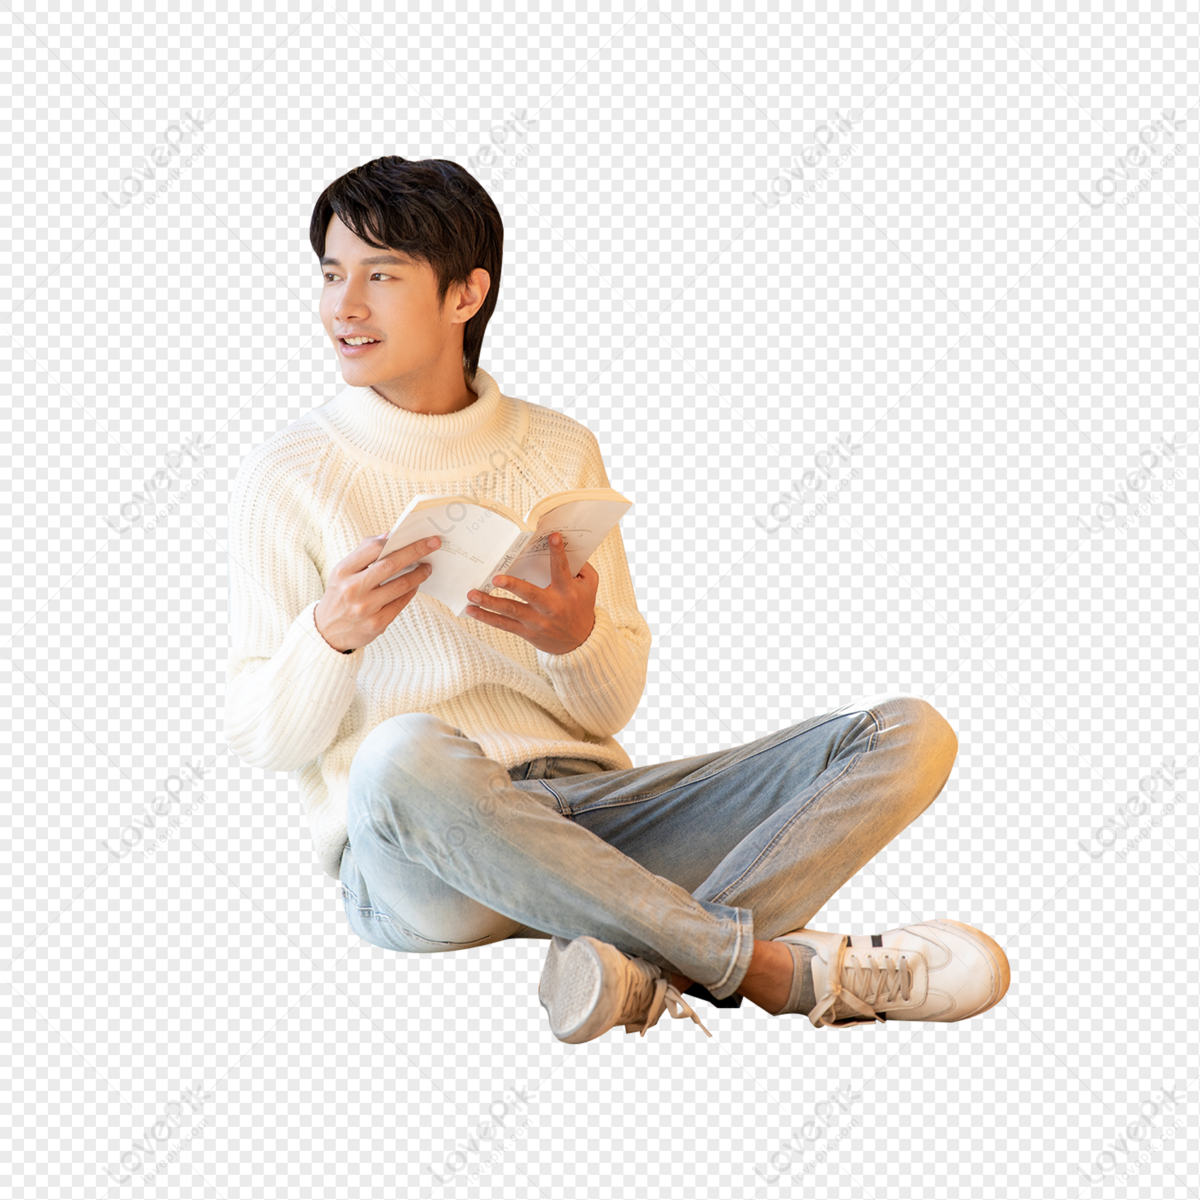 Male sitting on library floor and reading book, young, leisure office, book png hd transparent image